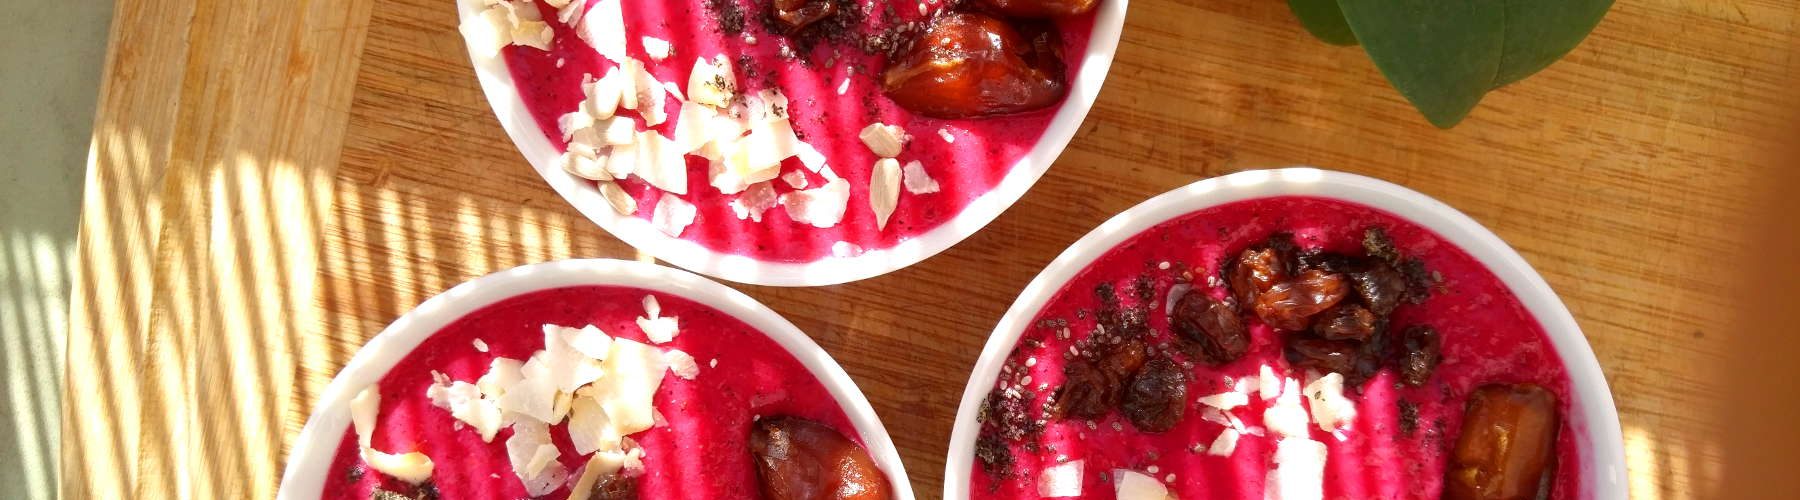 3 pitaya smoothie bowls with toppings